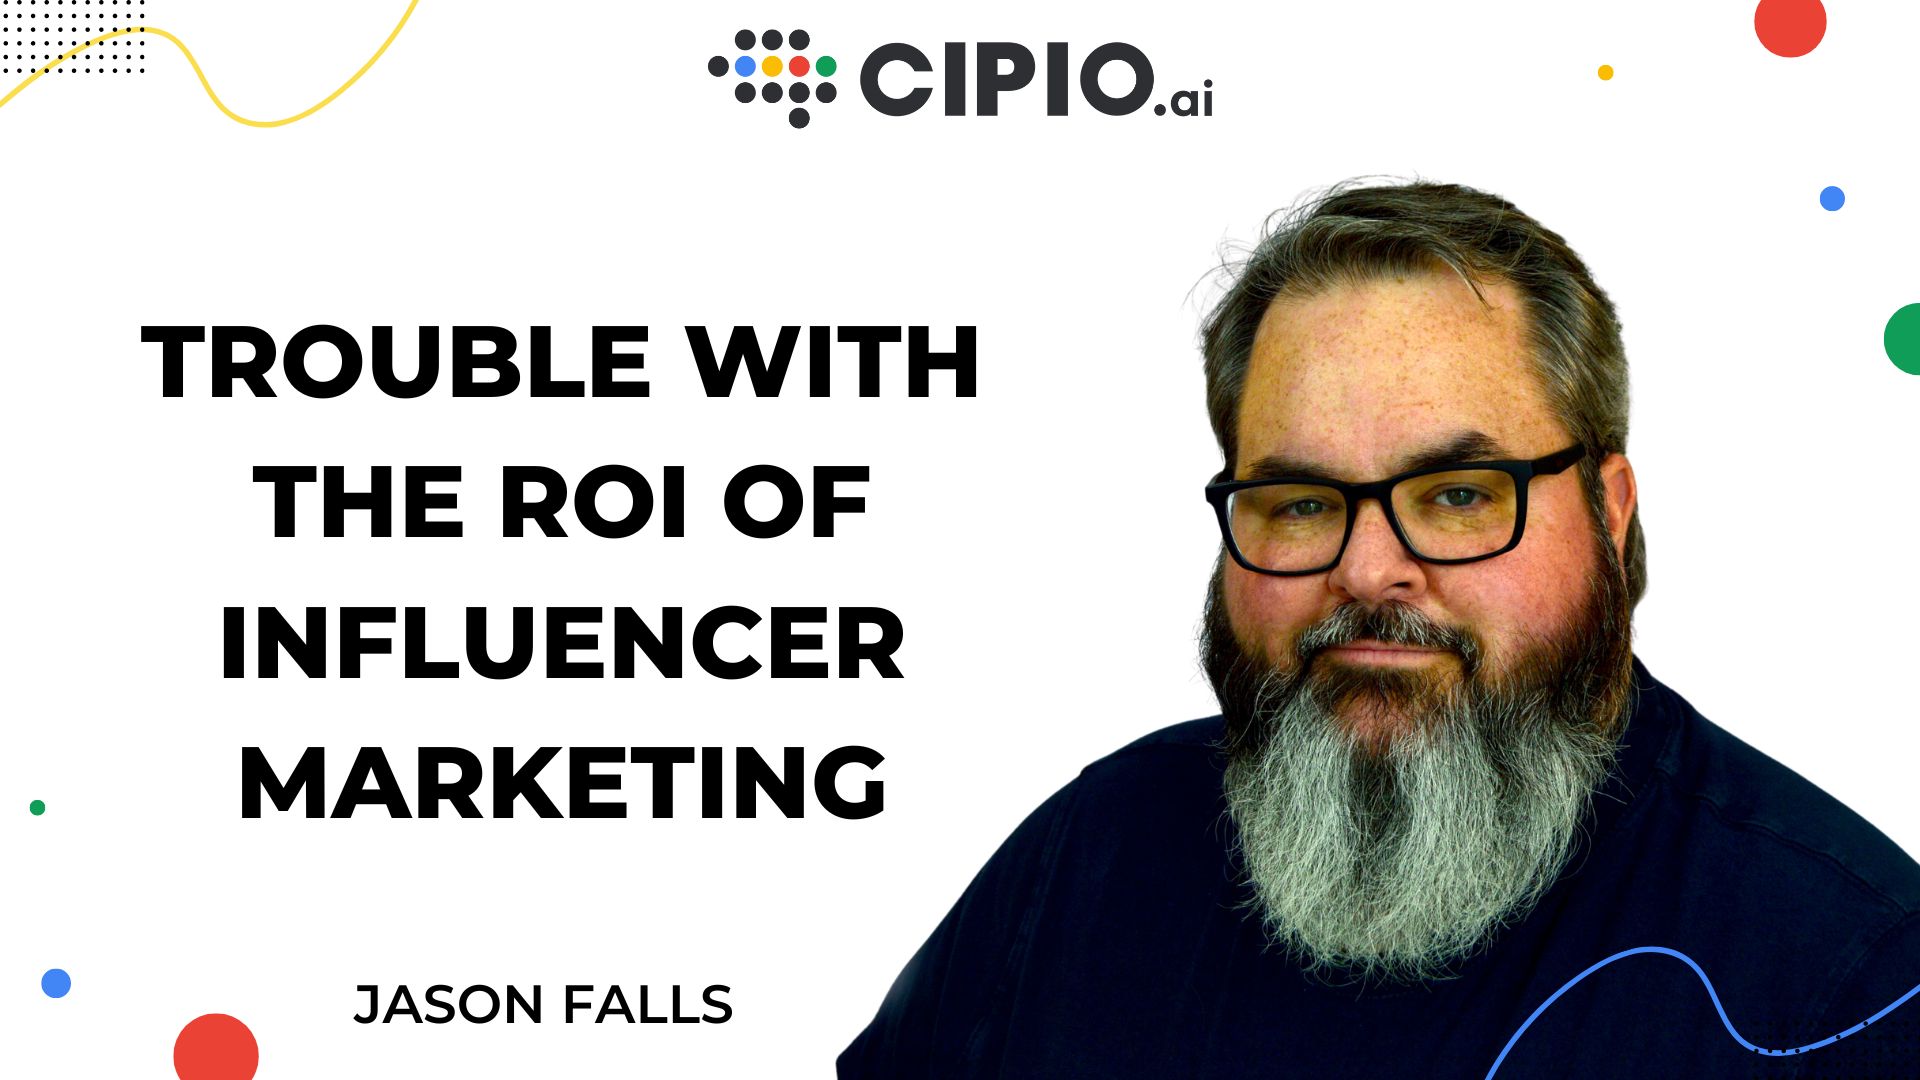 Are you having trouble with the ROI of Influencer Marketing?